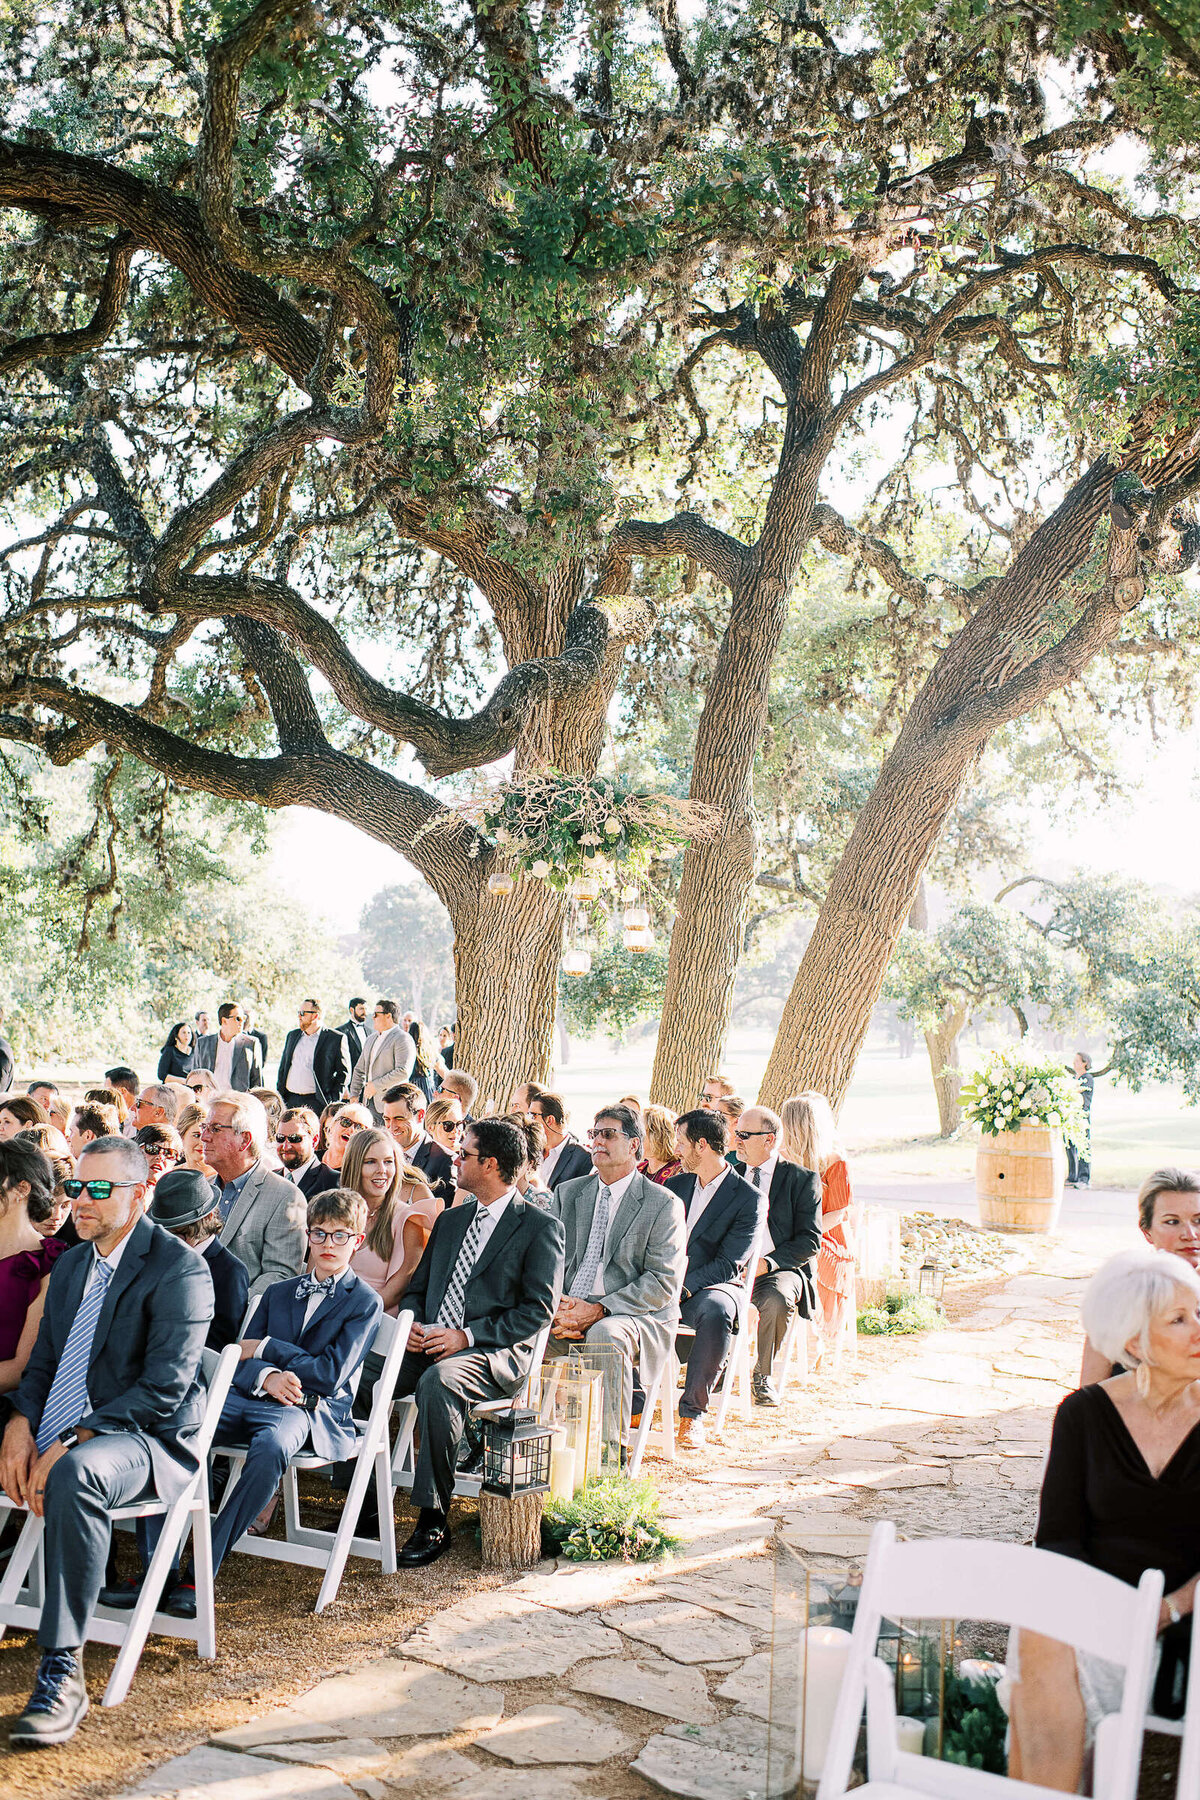 Beautiful outdoor wedding underneath large oak tree in the Texas Hill Country